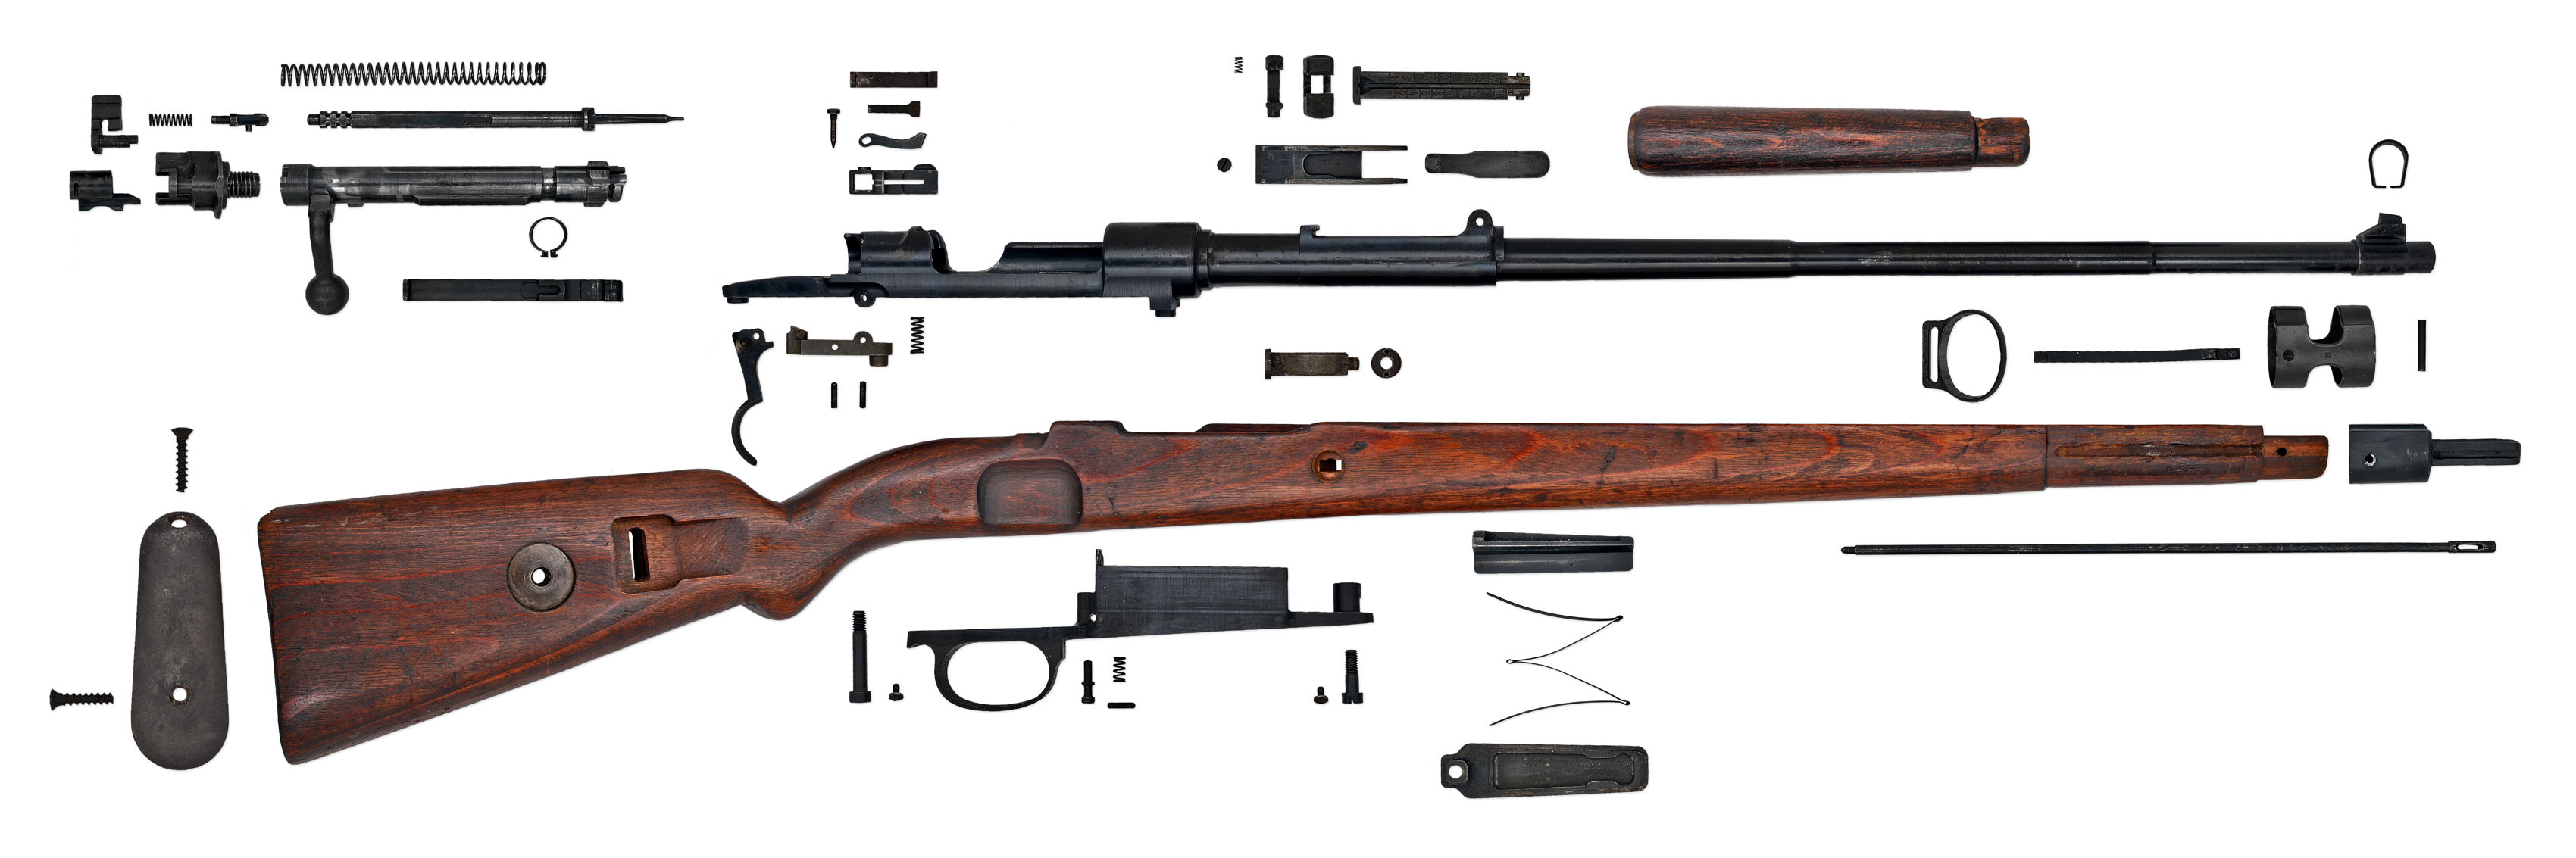 Nice Images Collection: K98 Mauser Rifle Desktop Wallpapers